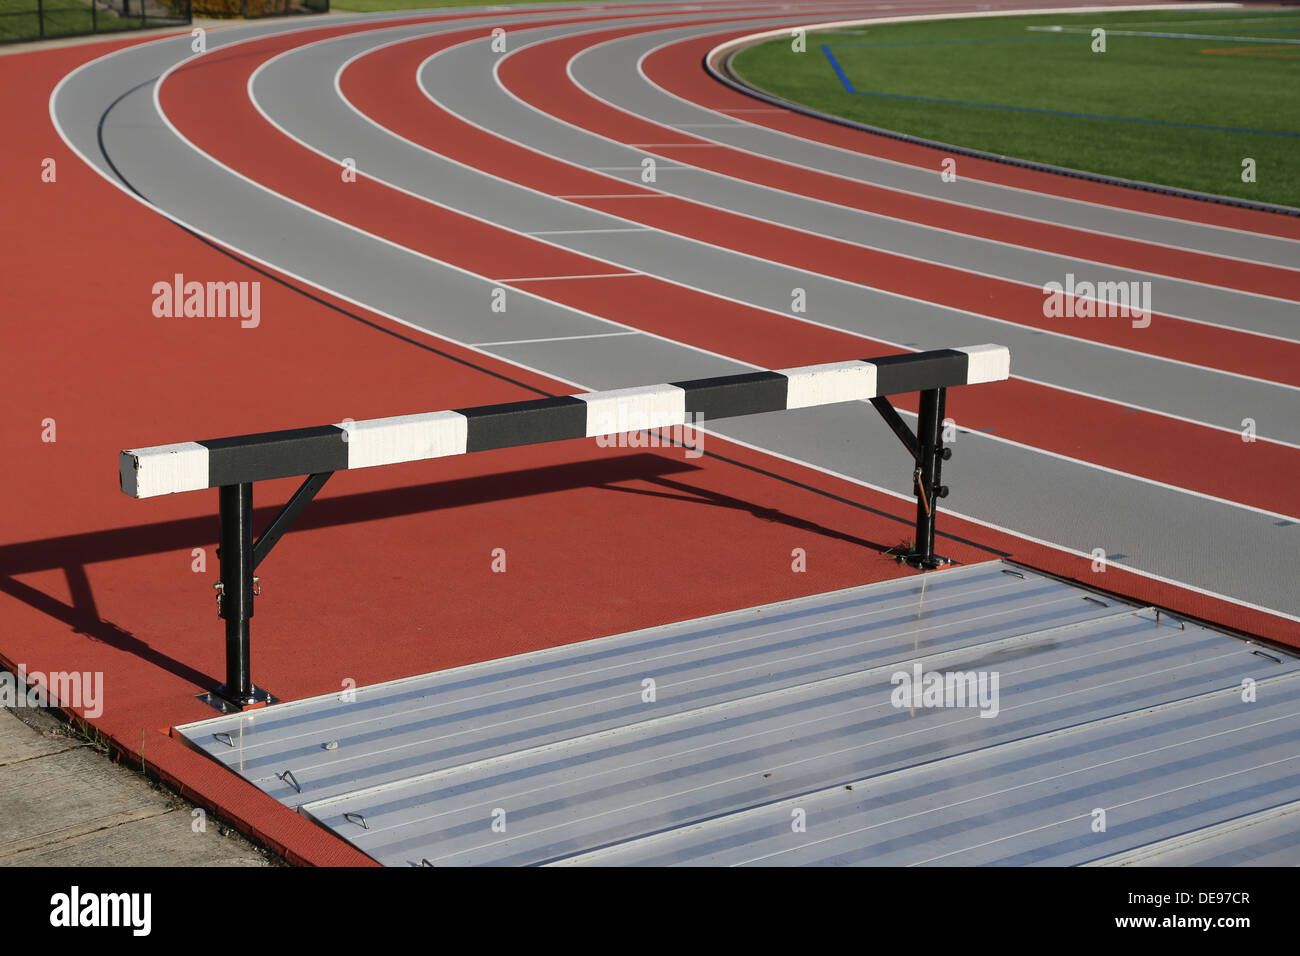 Track and athlete hurdling field Stock Photo